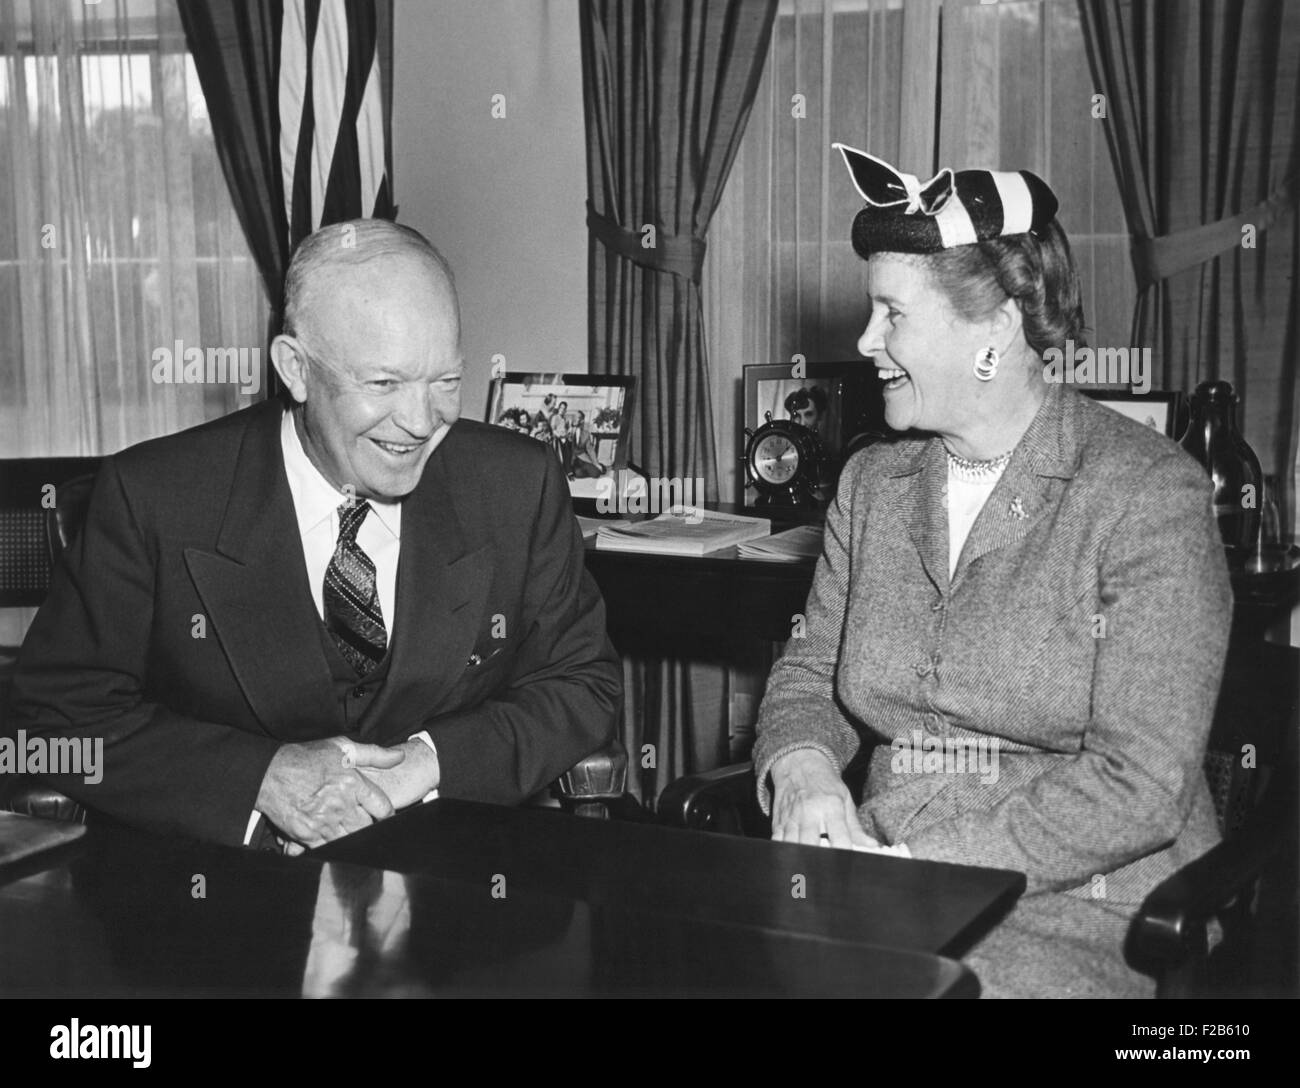 President Eisenhower with Senator Eva Kelley Bowring, a Republican from Nebraska. May 1, 1954. She was appointed to the U.S. Senate by Governor Robert Crosby to fill the vacancy caused by the death of Dwight Griswold and served from April 16, 1954, to November 7, 1954. - (BSLOC 2014 16 191) Stock Photo